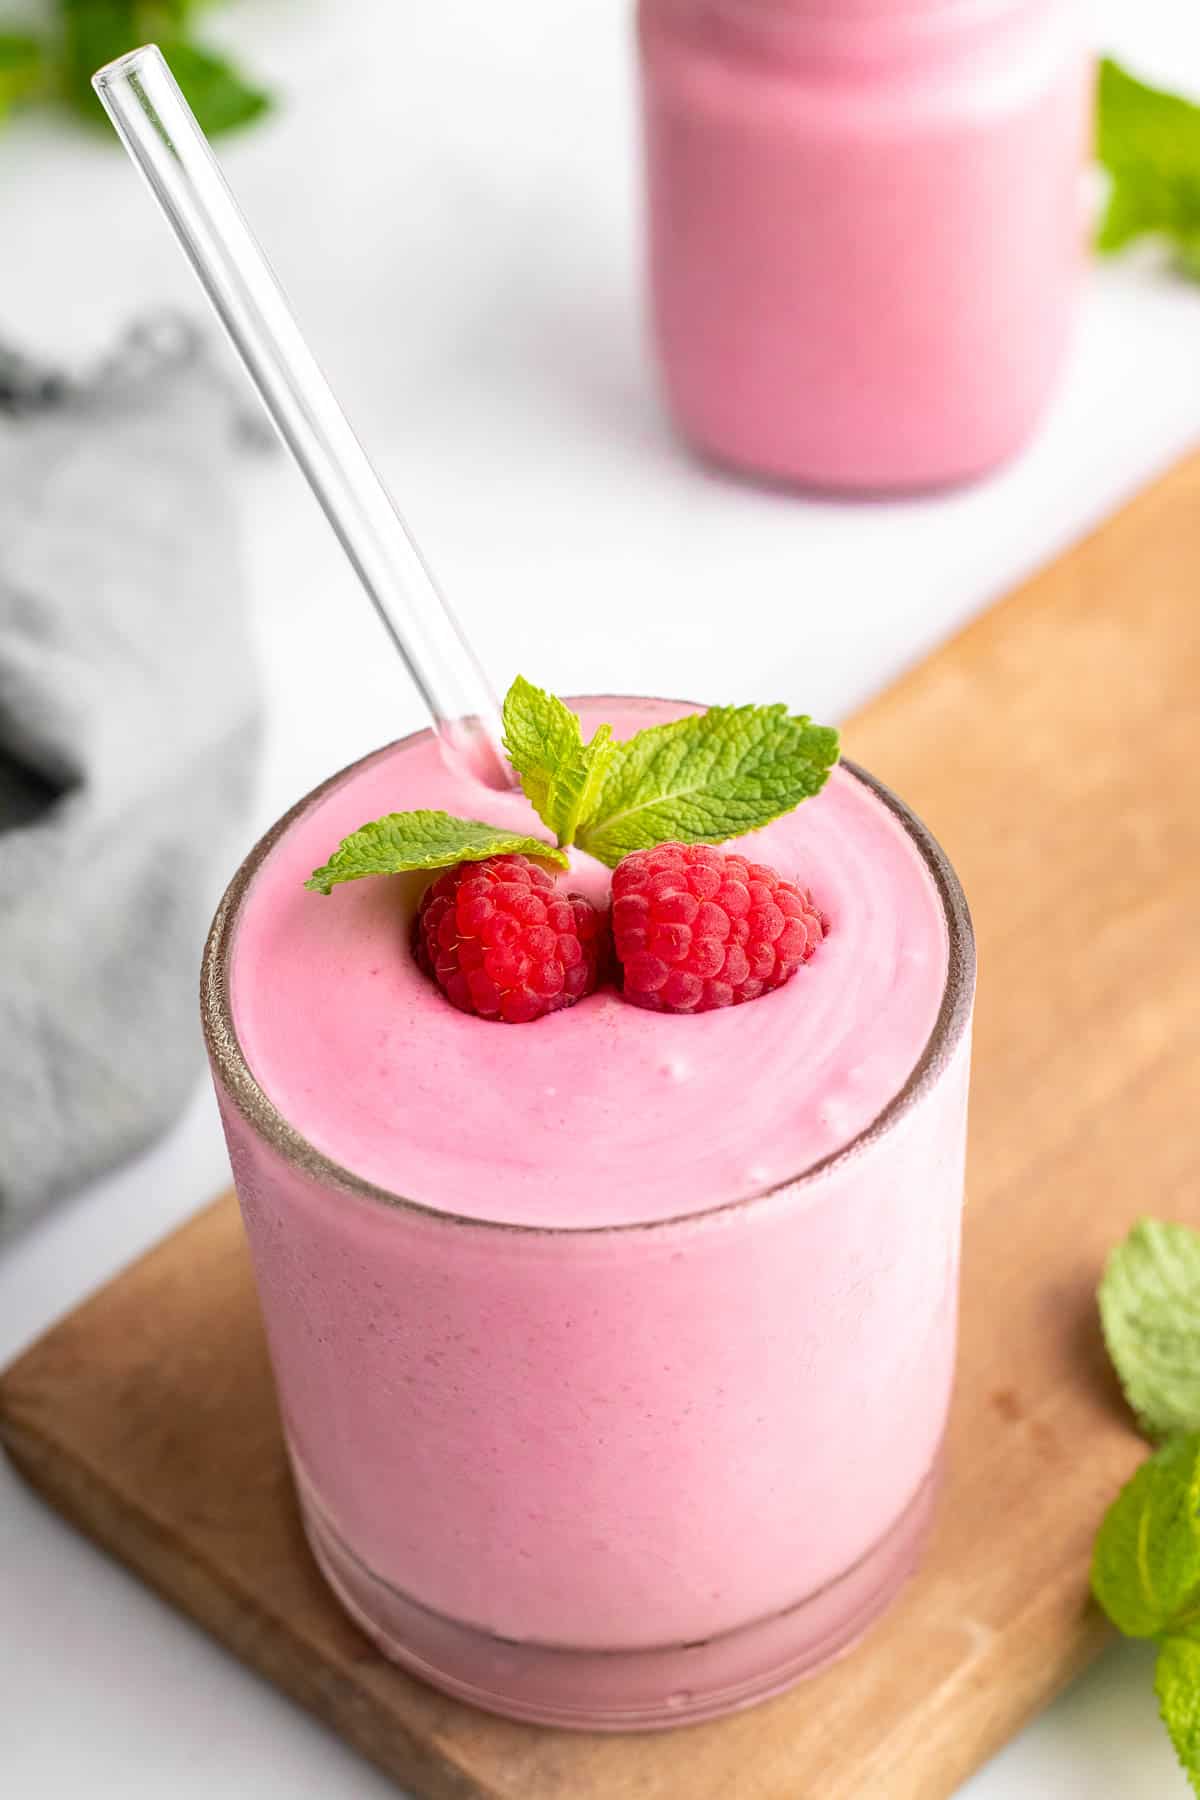 Raspberry smoothie in a glass jar on a wooden board, topped with fresh strawberries